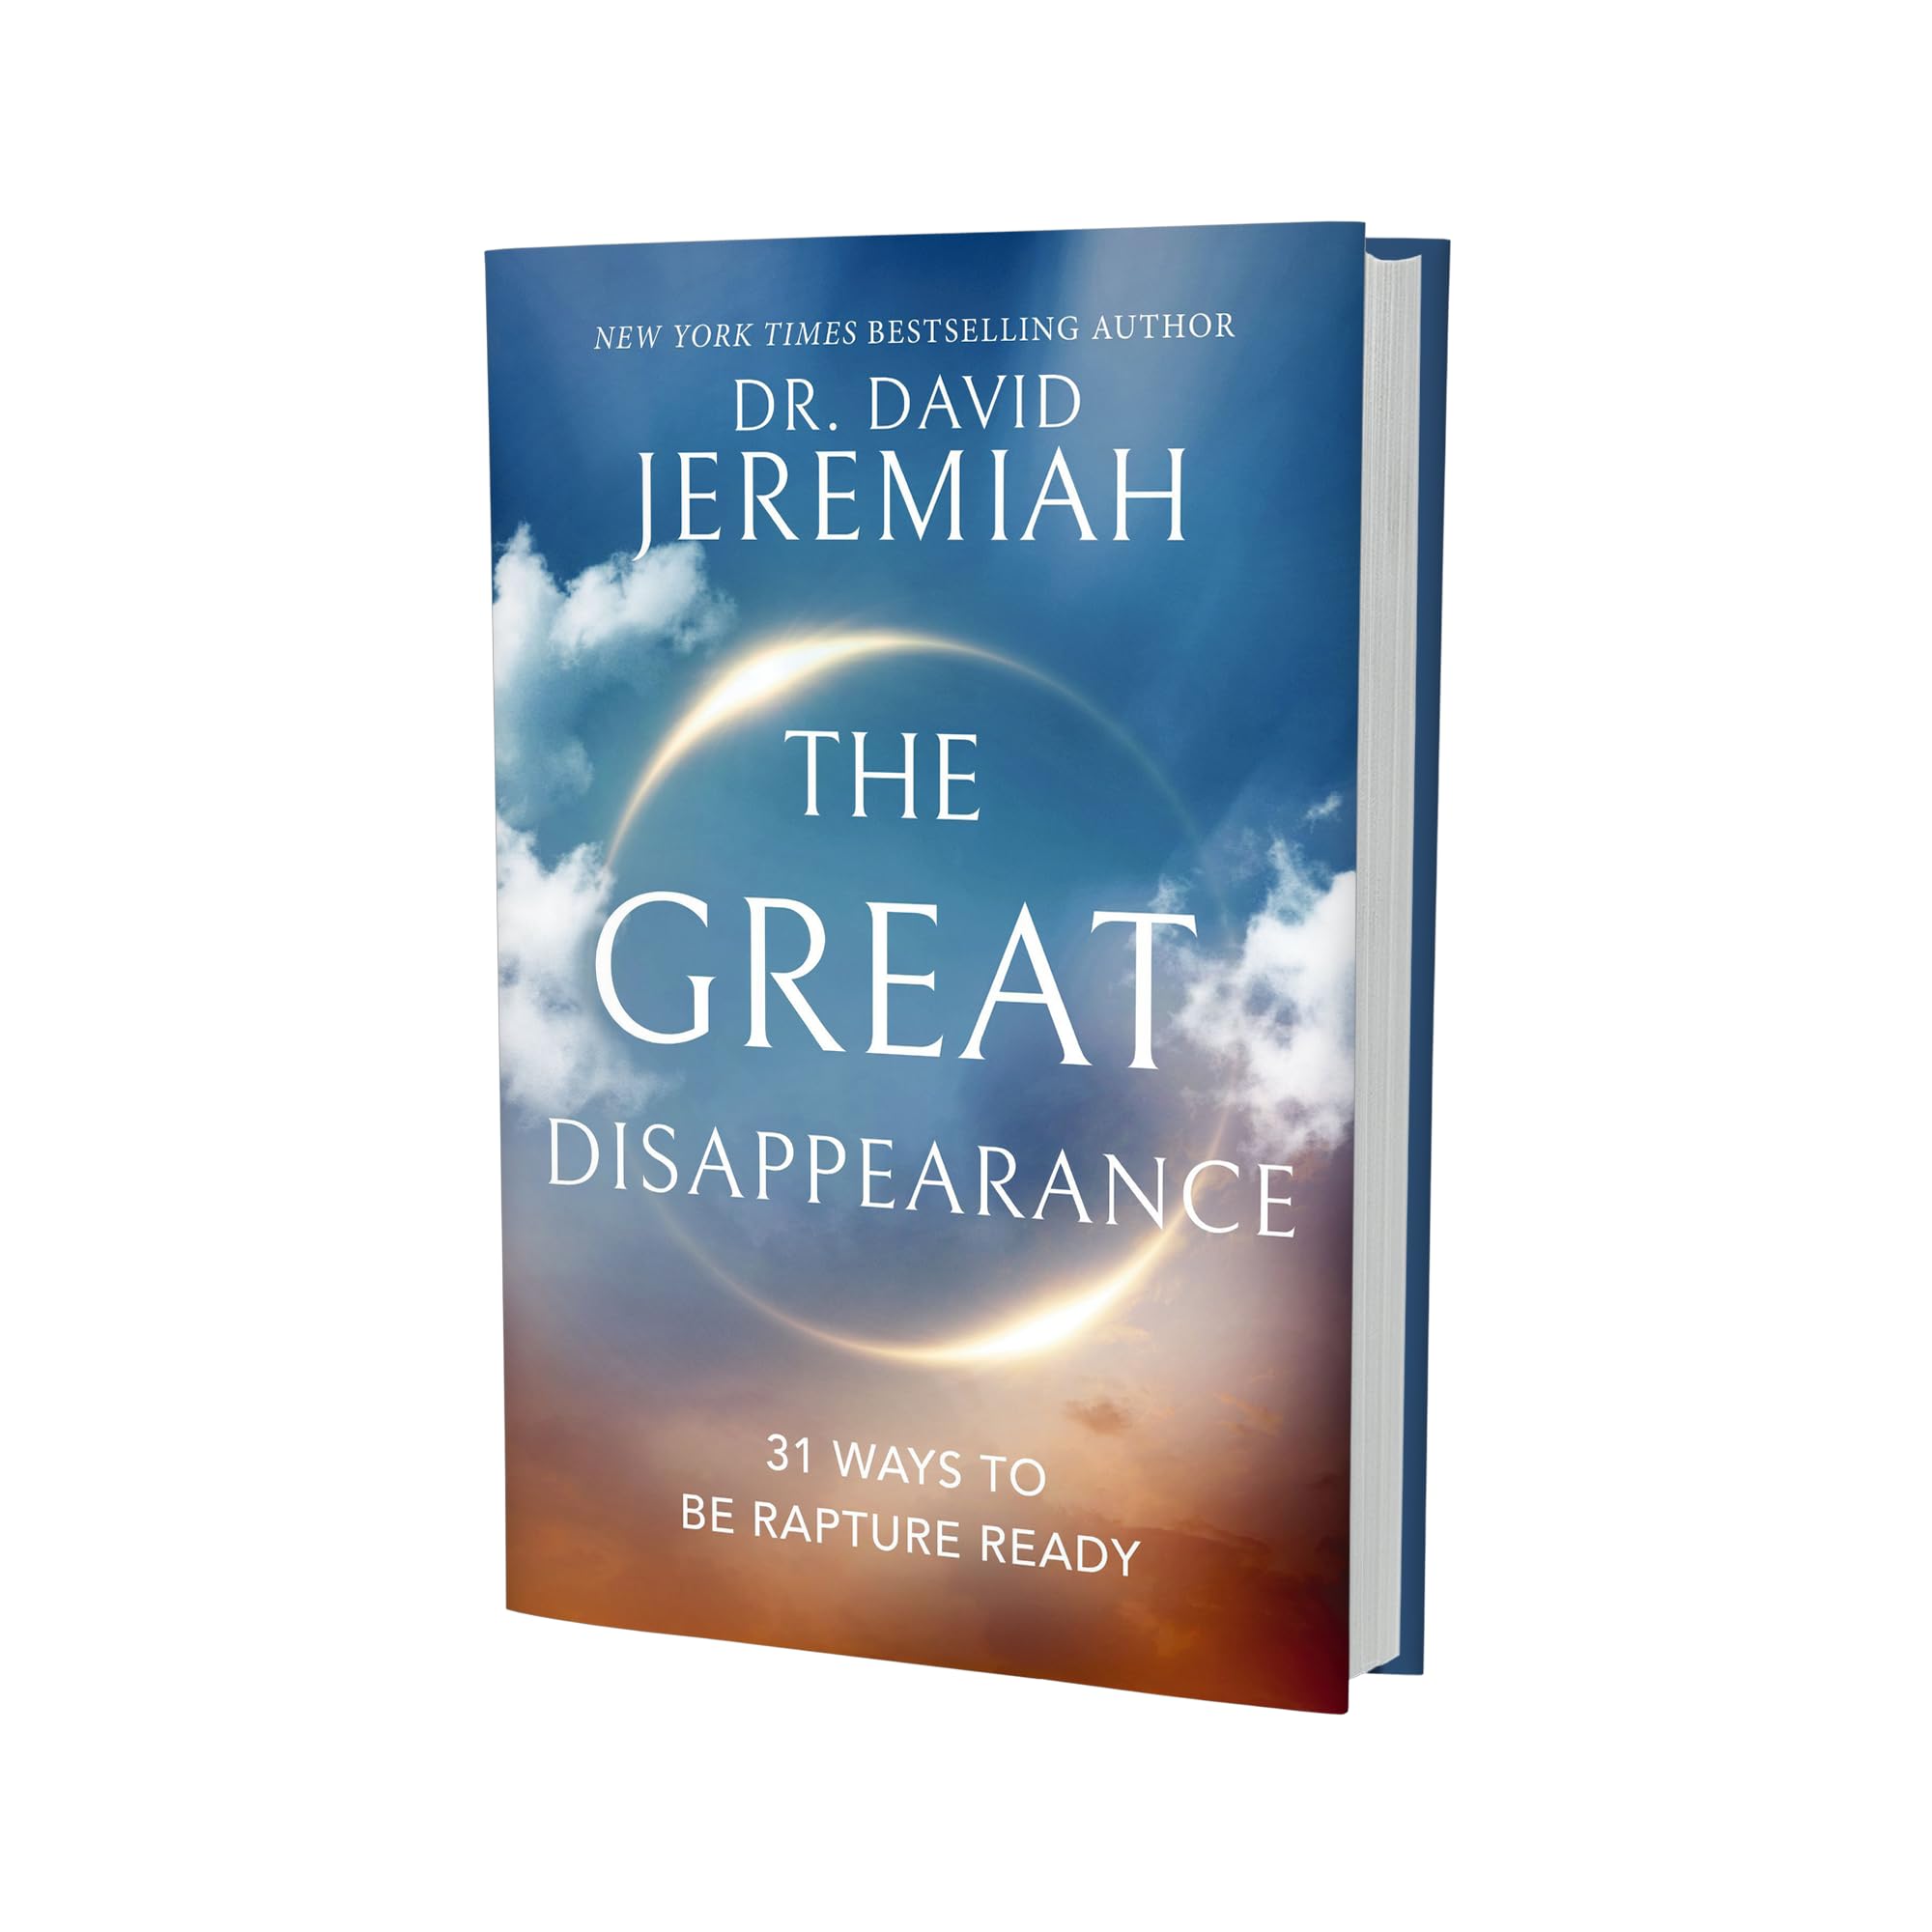 The Great Disappearance: 31 Ways to be Rapture Ready